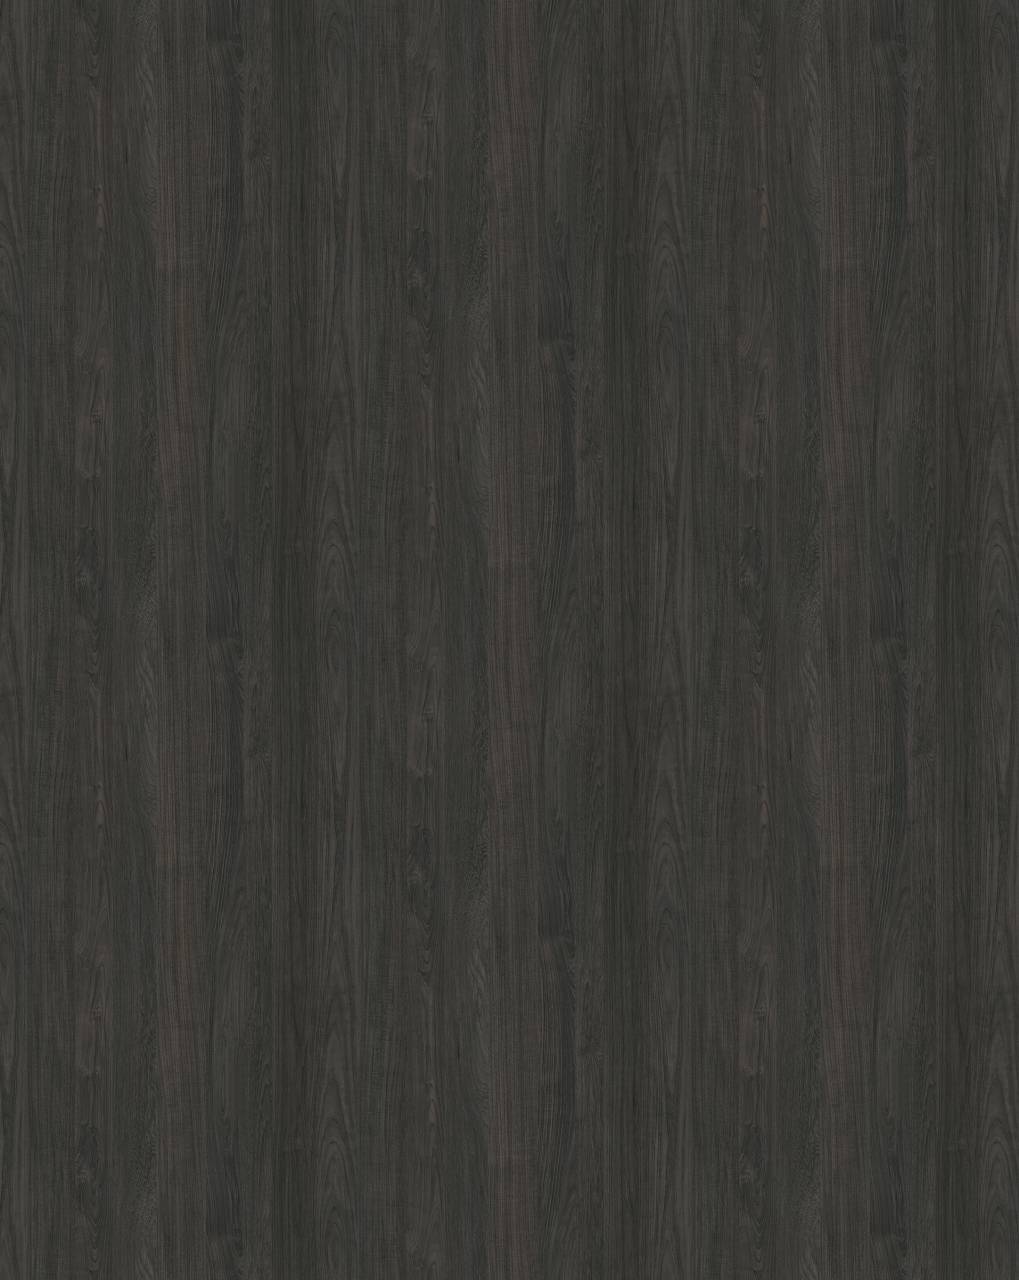 Carbon Marine Wood PW HPL with textured surface and dark grey tones for a sleek and sophisticated look.